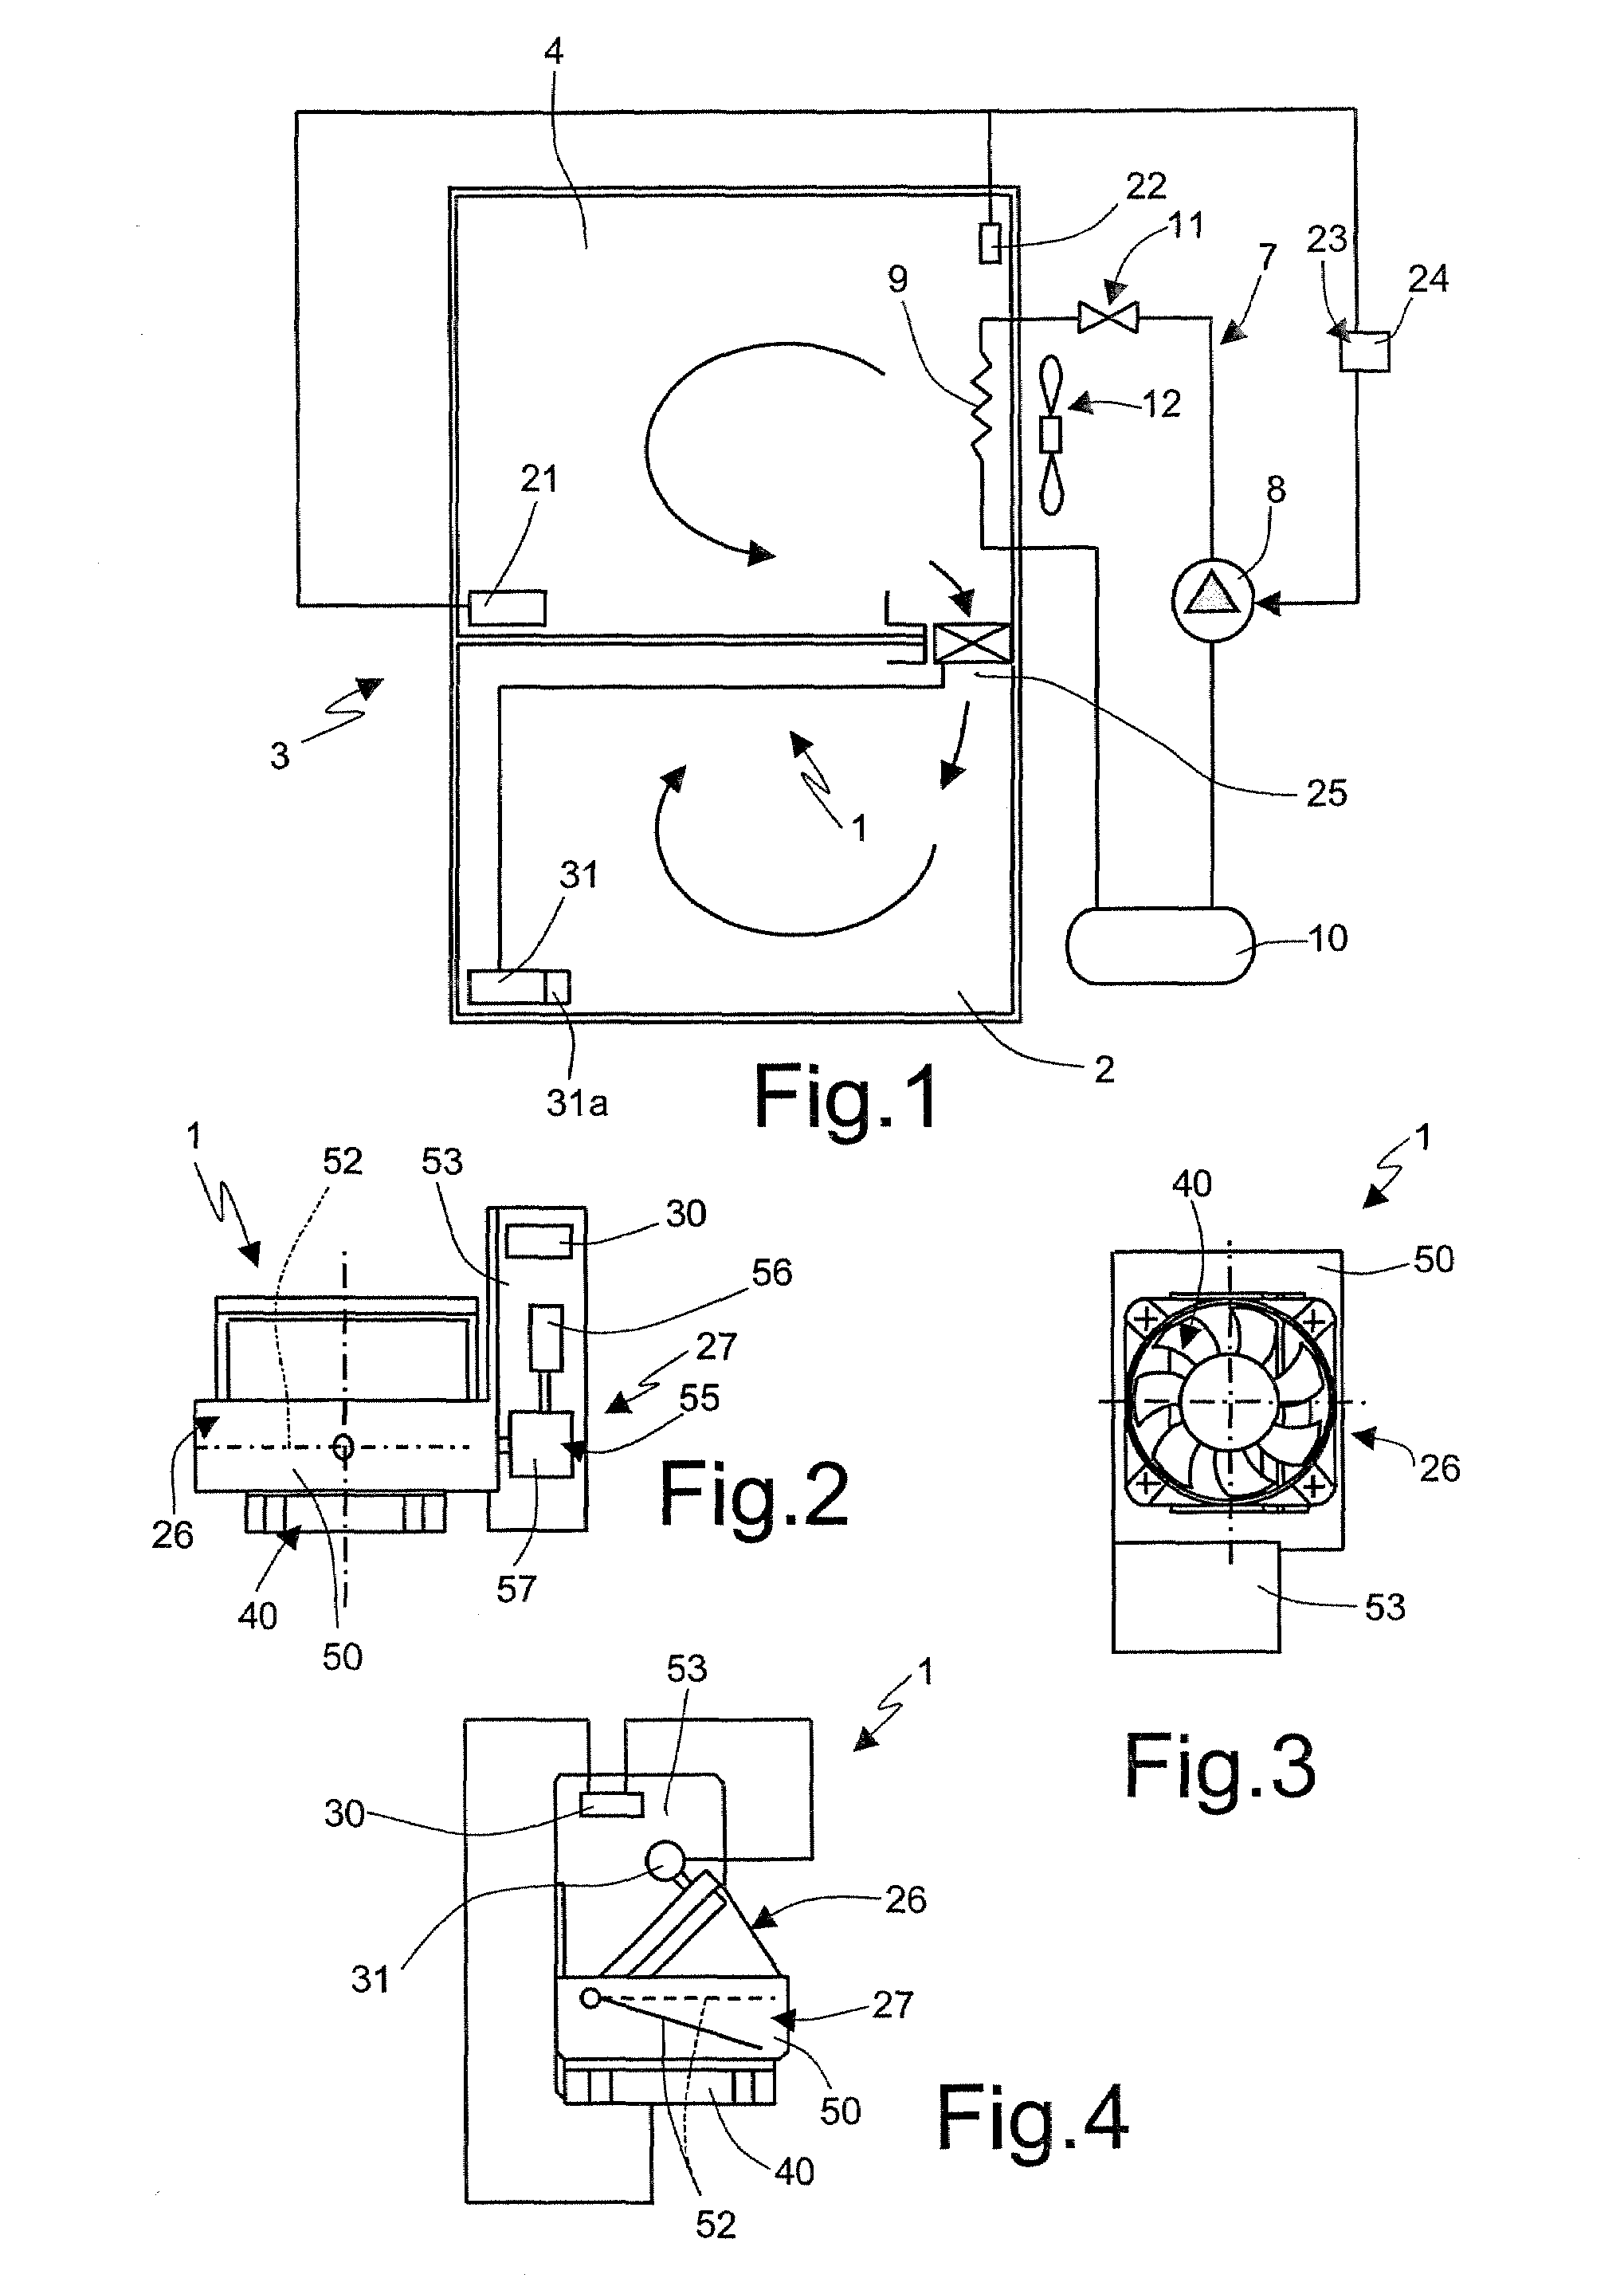 Device and Method For Controlling the Temperature Inside a Refrigerating Unit of a Combined Refrigerator-Freezer